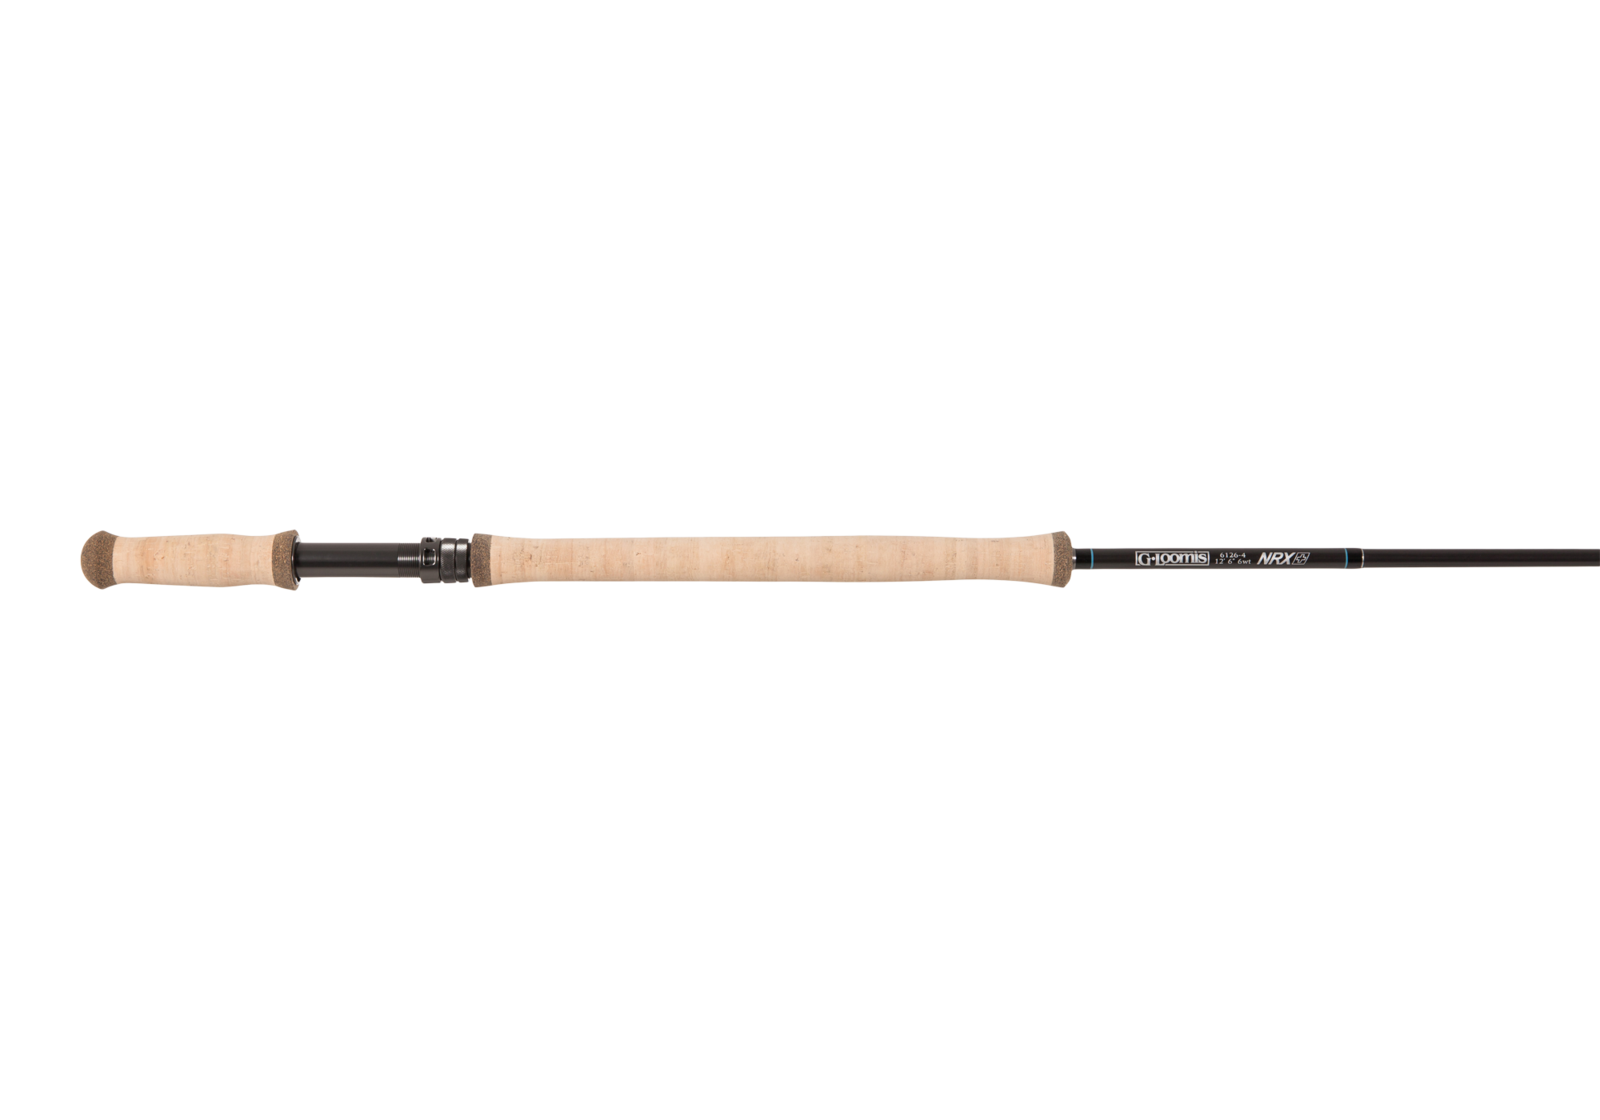 Redington Claymore Trout Spey 2wt 11'0 – Raft & Fly Shop